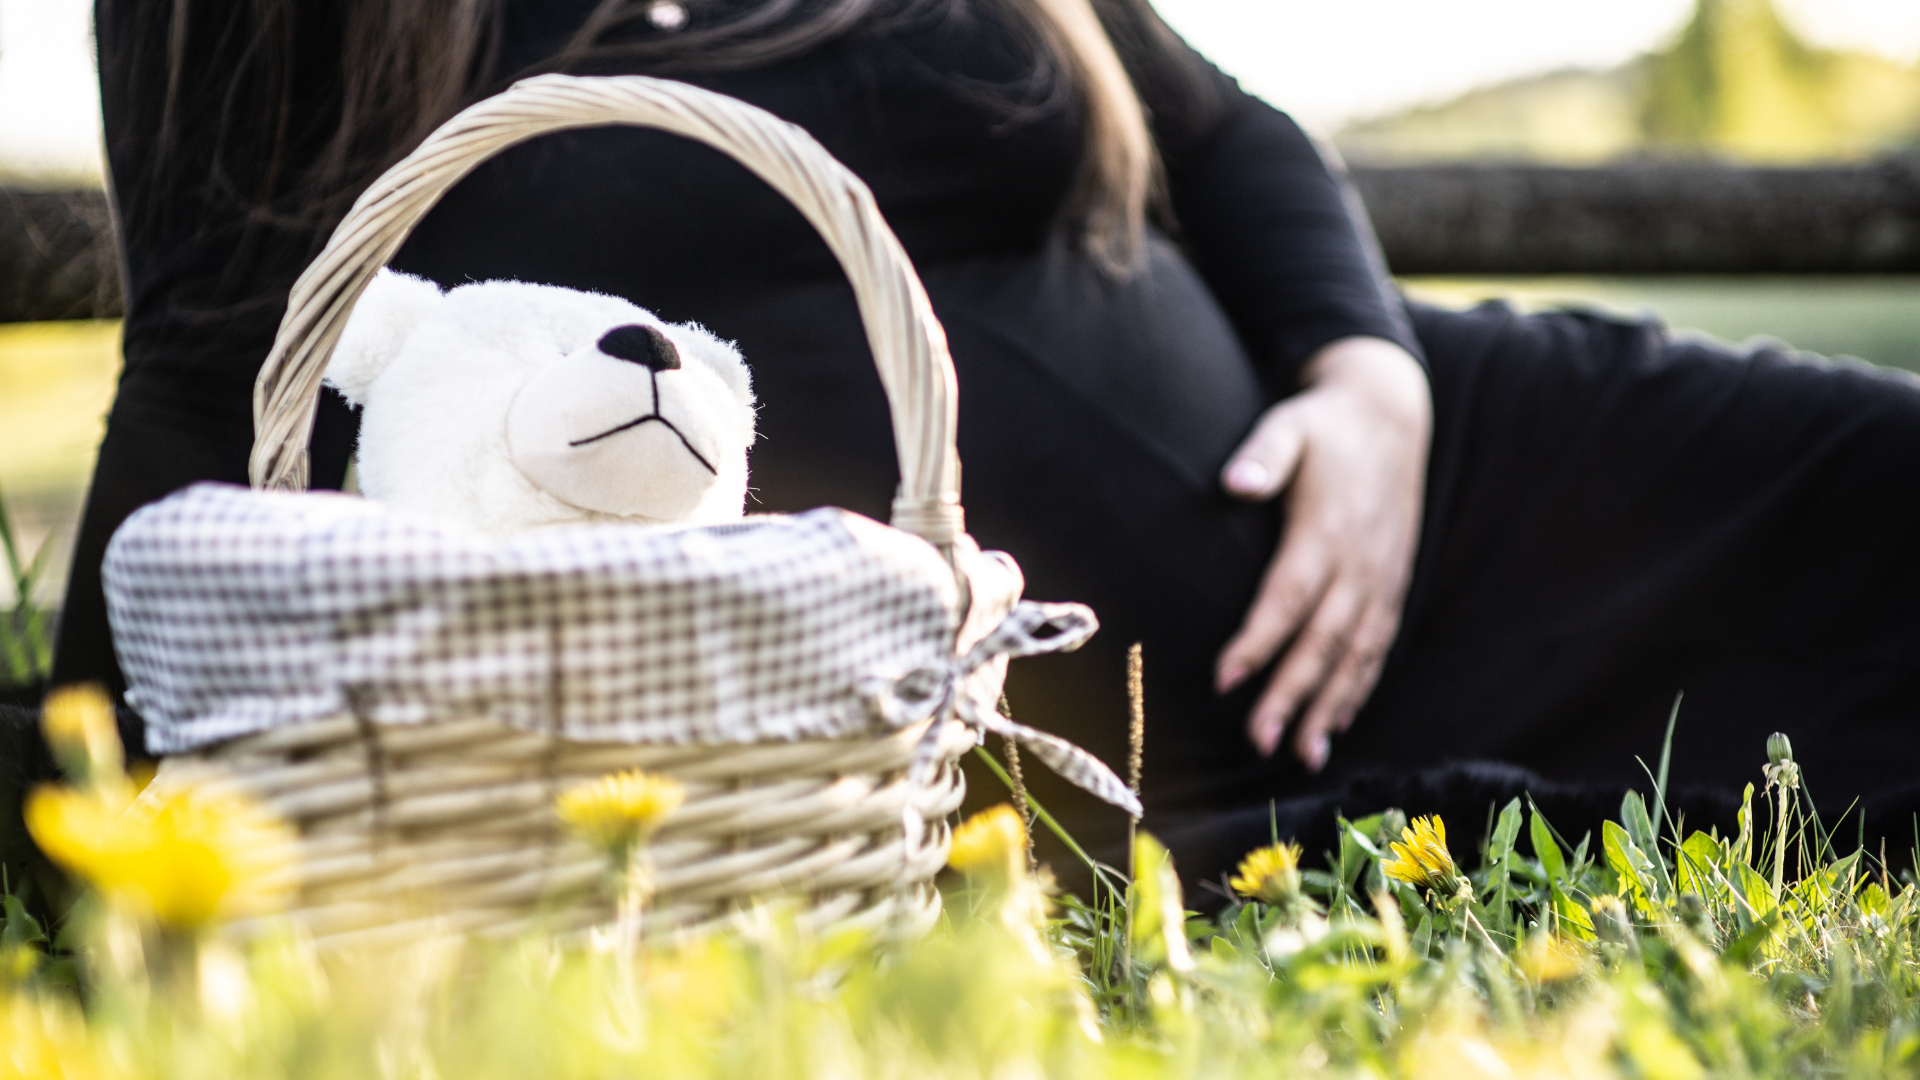 13 Tips To Help Prepare For Baby's Arrival